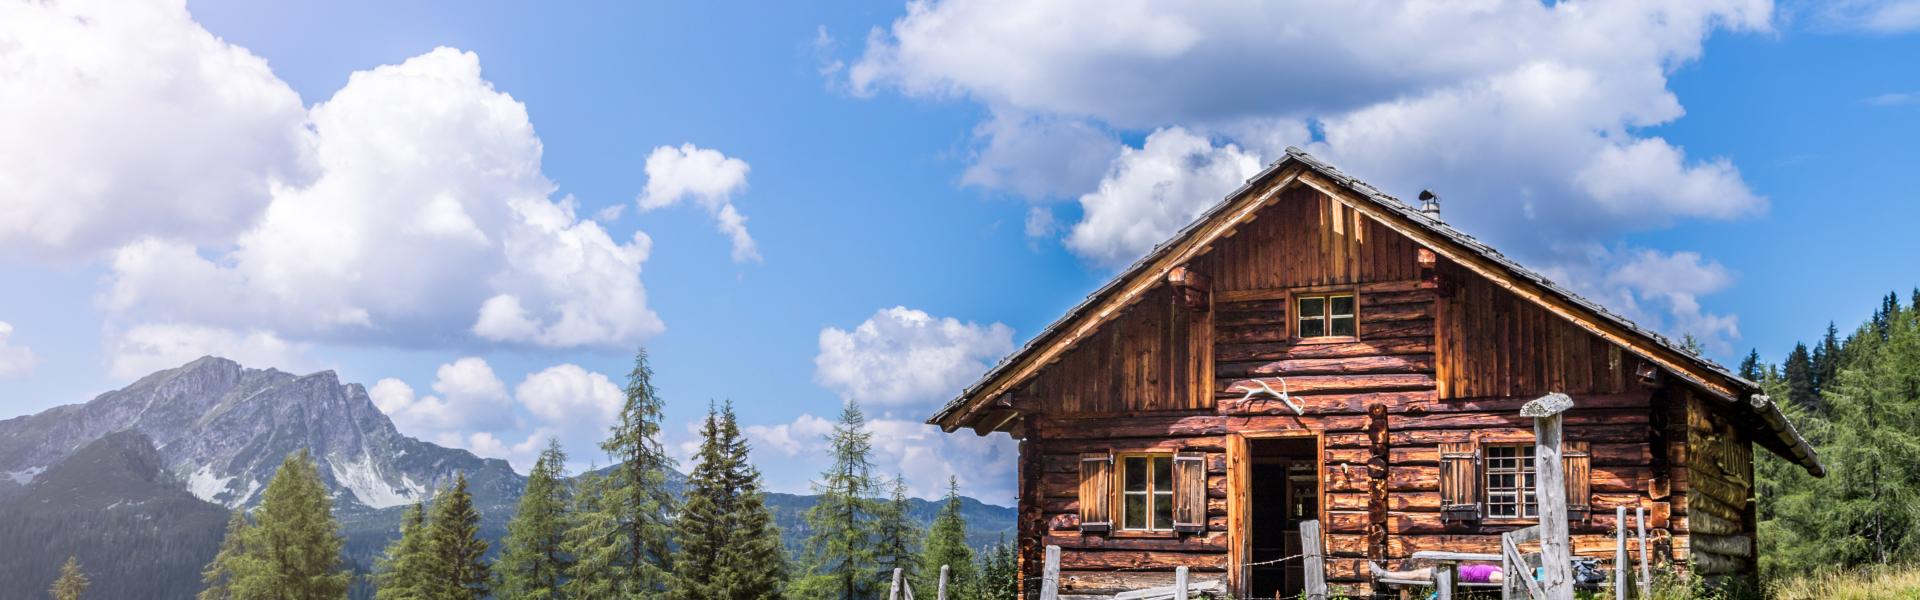 Natural View of a House in Alpen